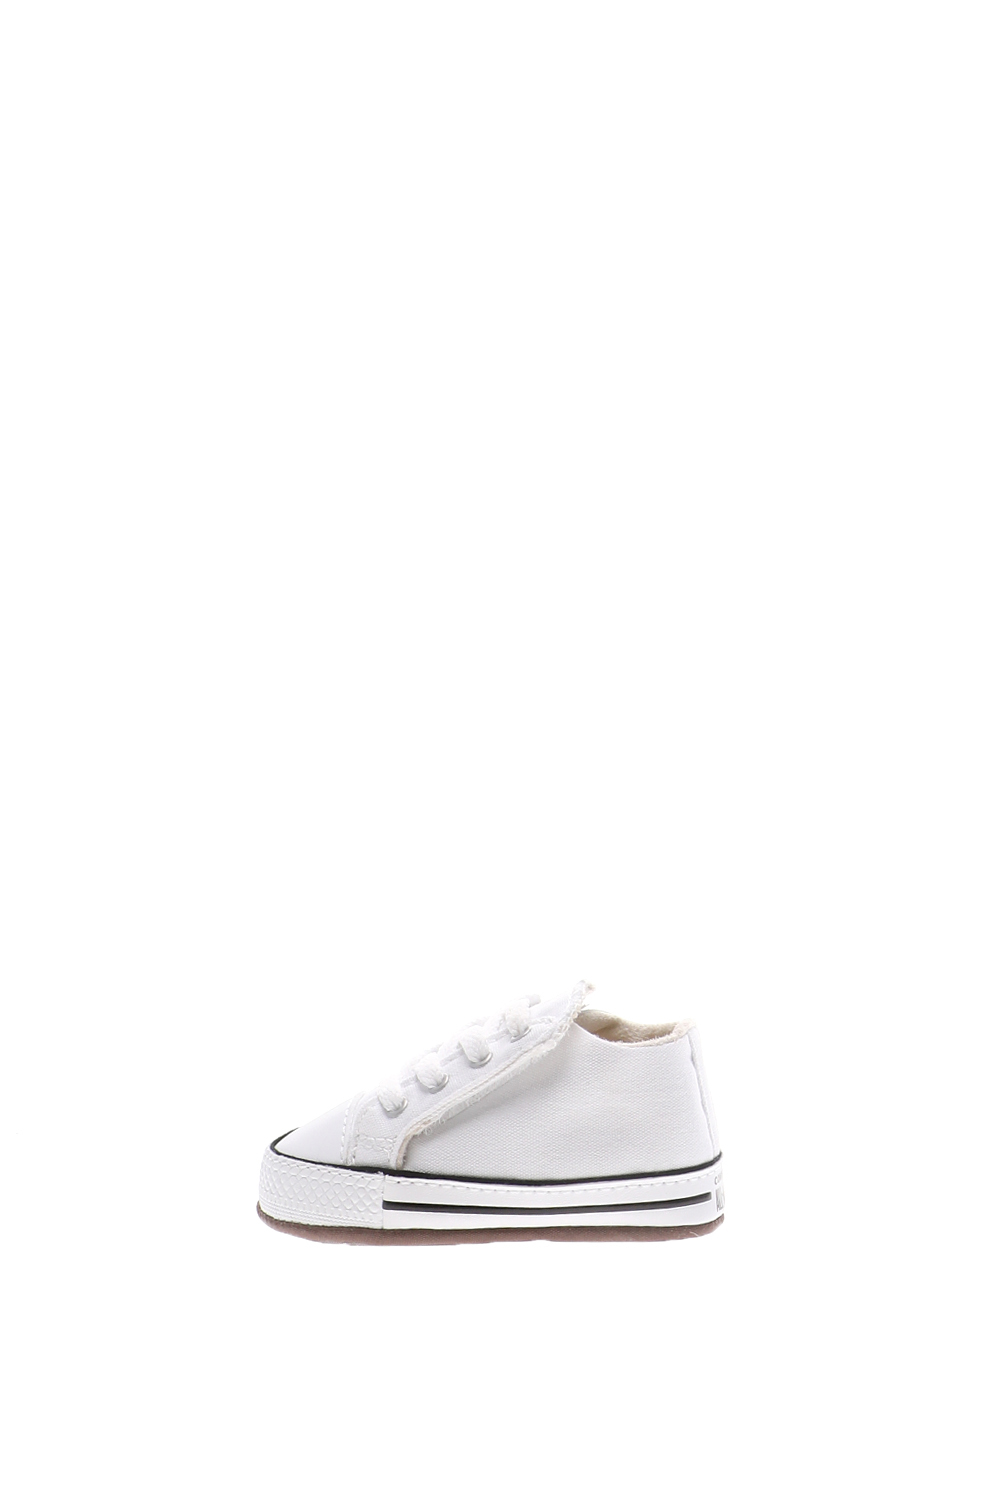 CONVERSE - Βρεφικά παπούτσια CONVERSE chuck taylor cribster Παιδικά/Baby/Παπούτσια/Sneakers